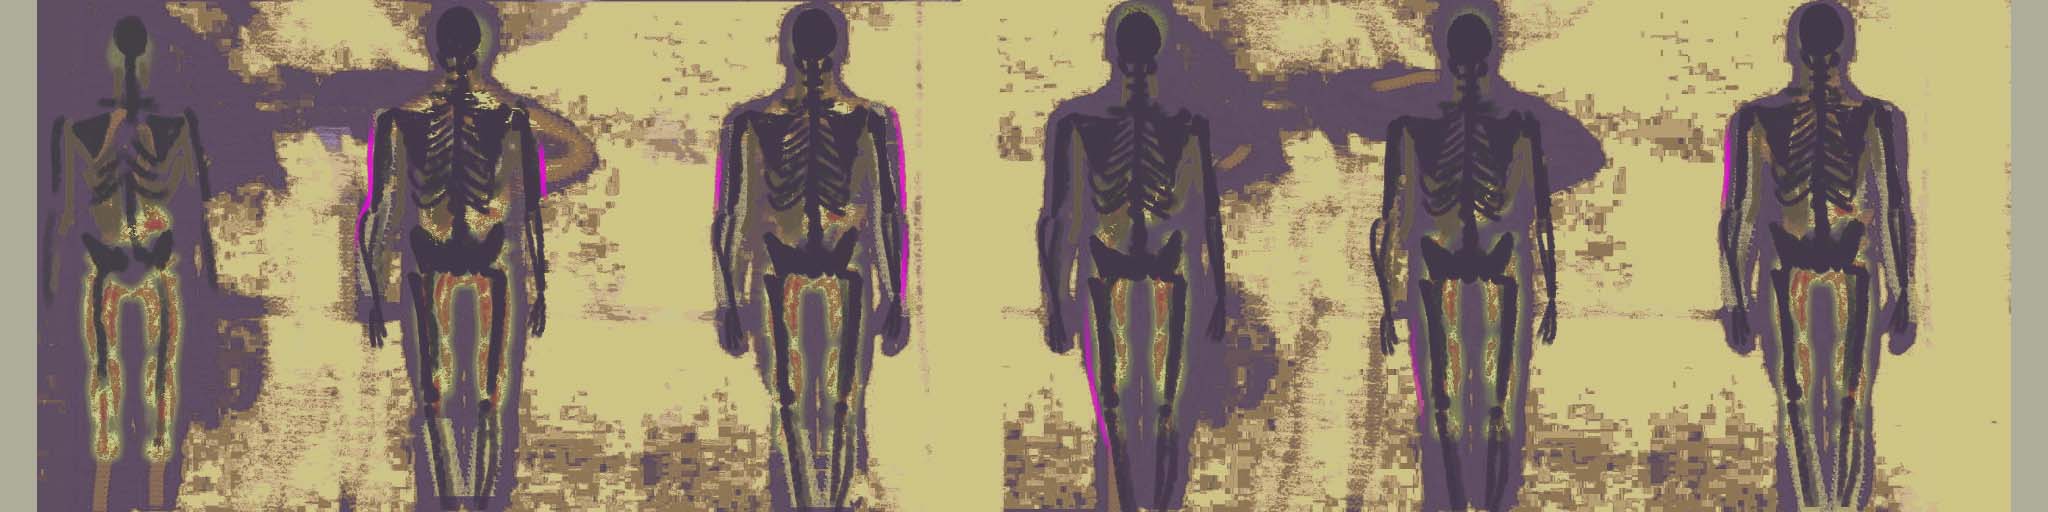 x-ray, skeletons, who's stronger, dark, painting